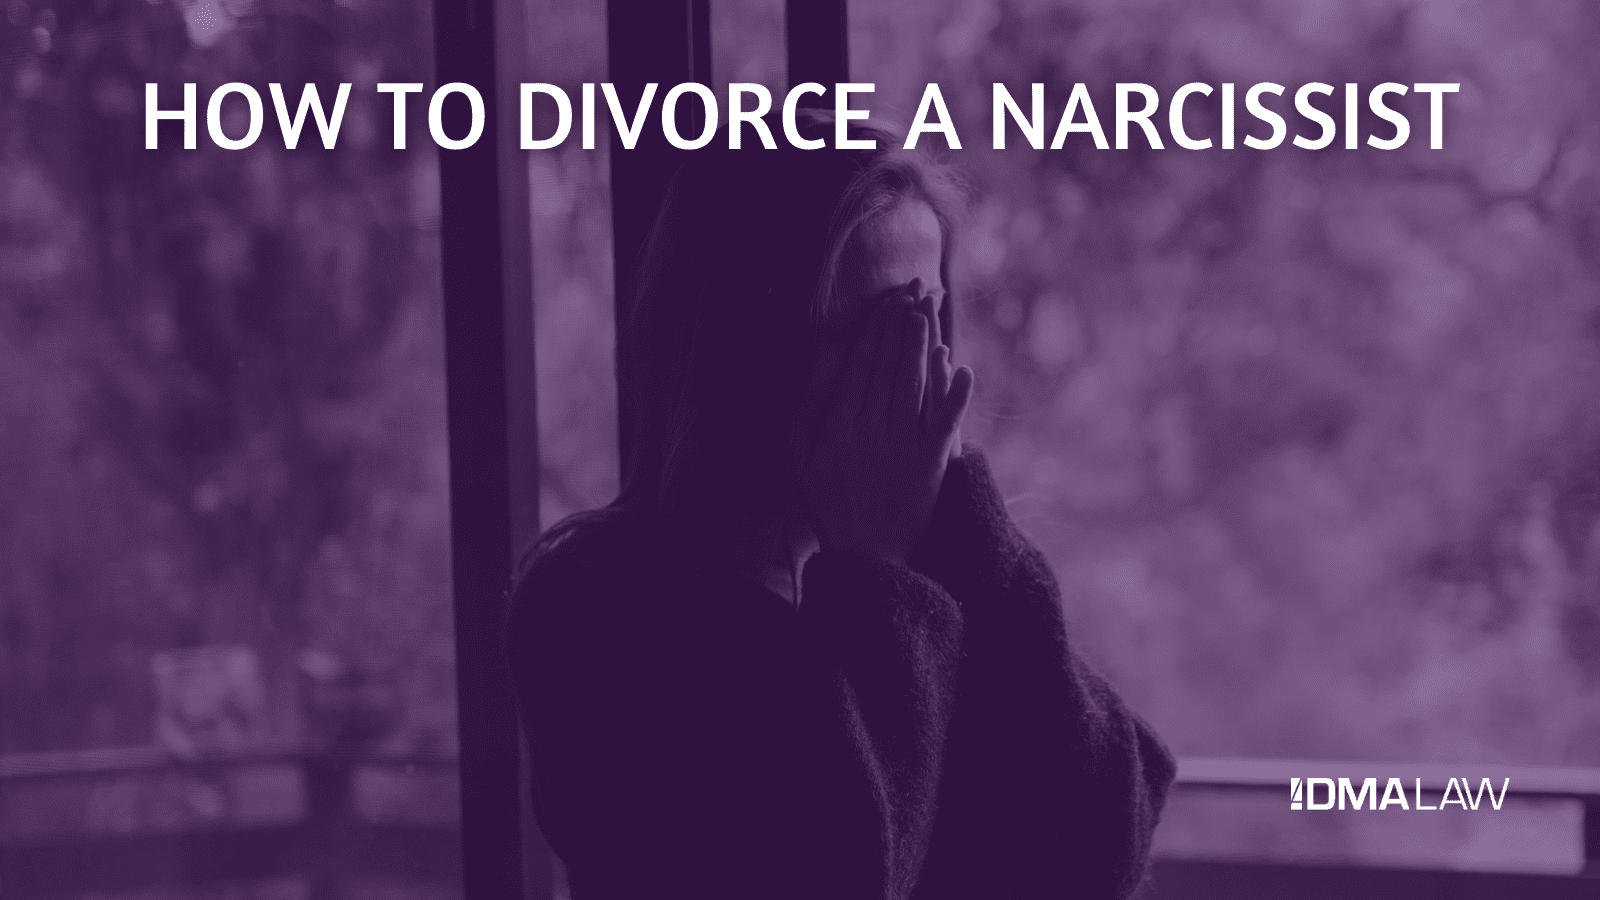 How to divorce a narcissist